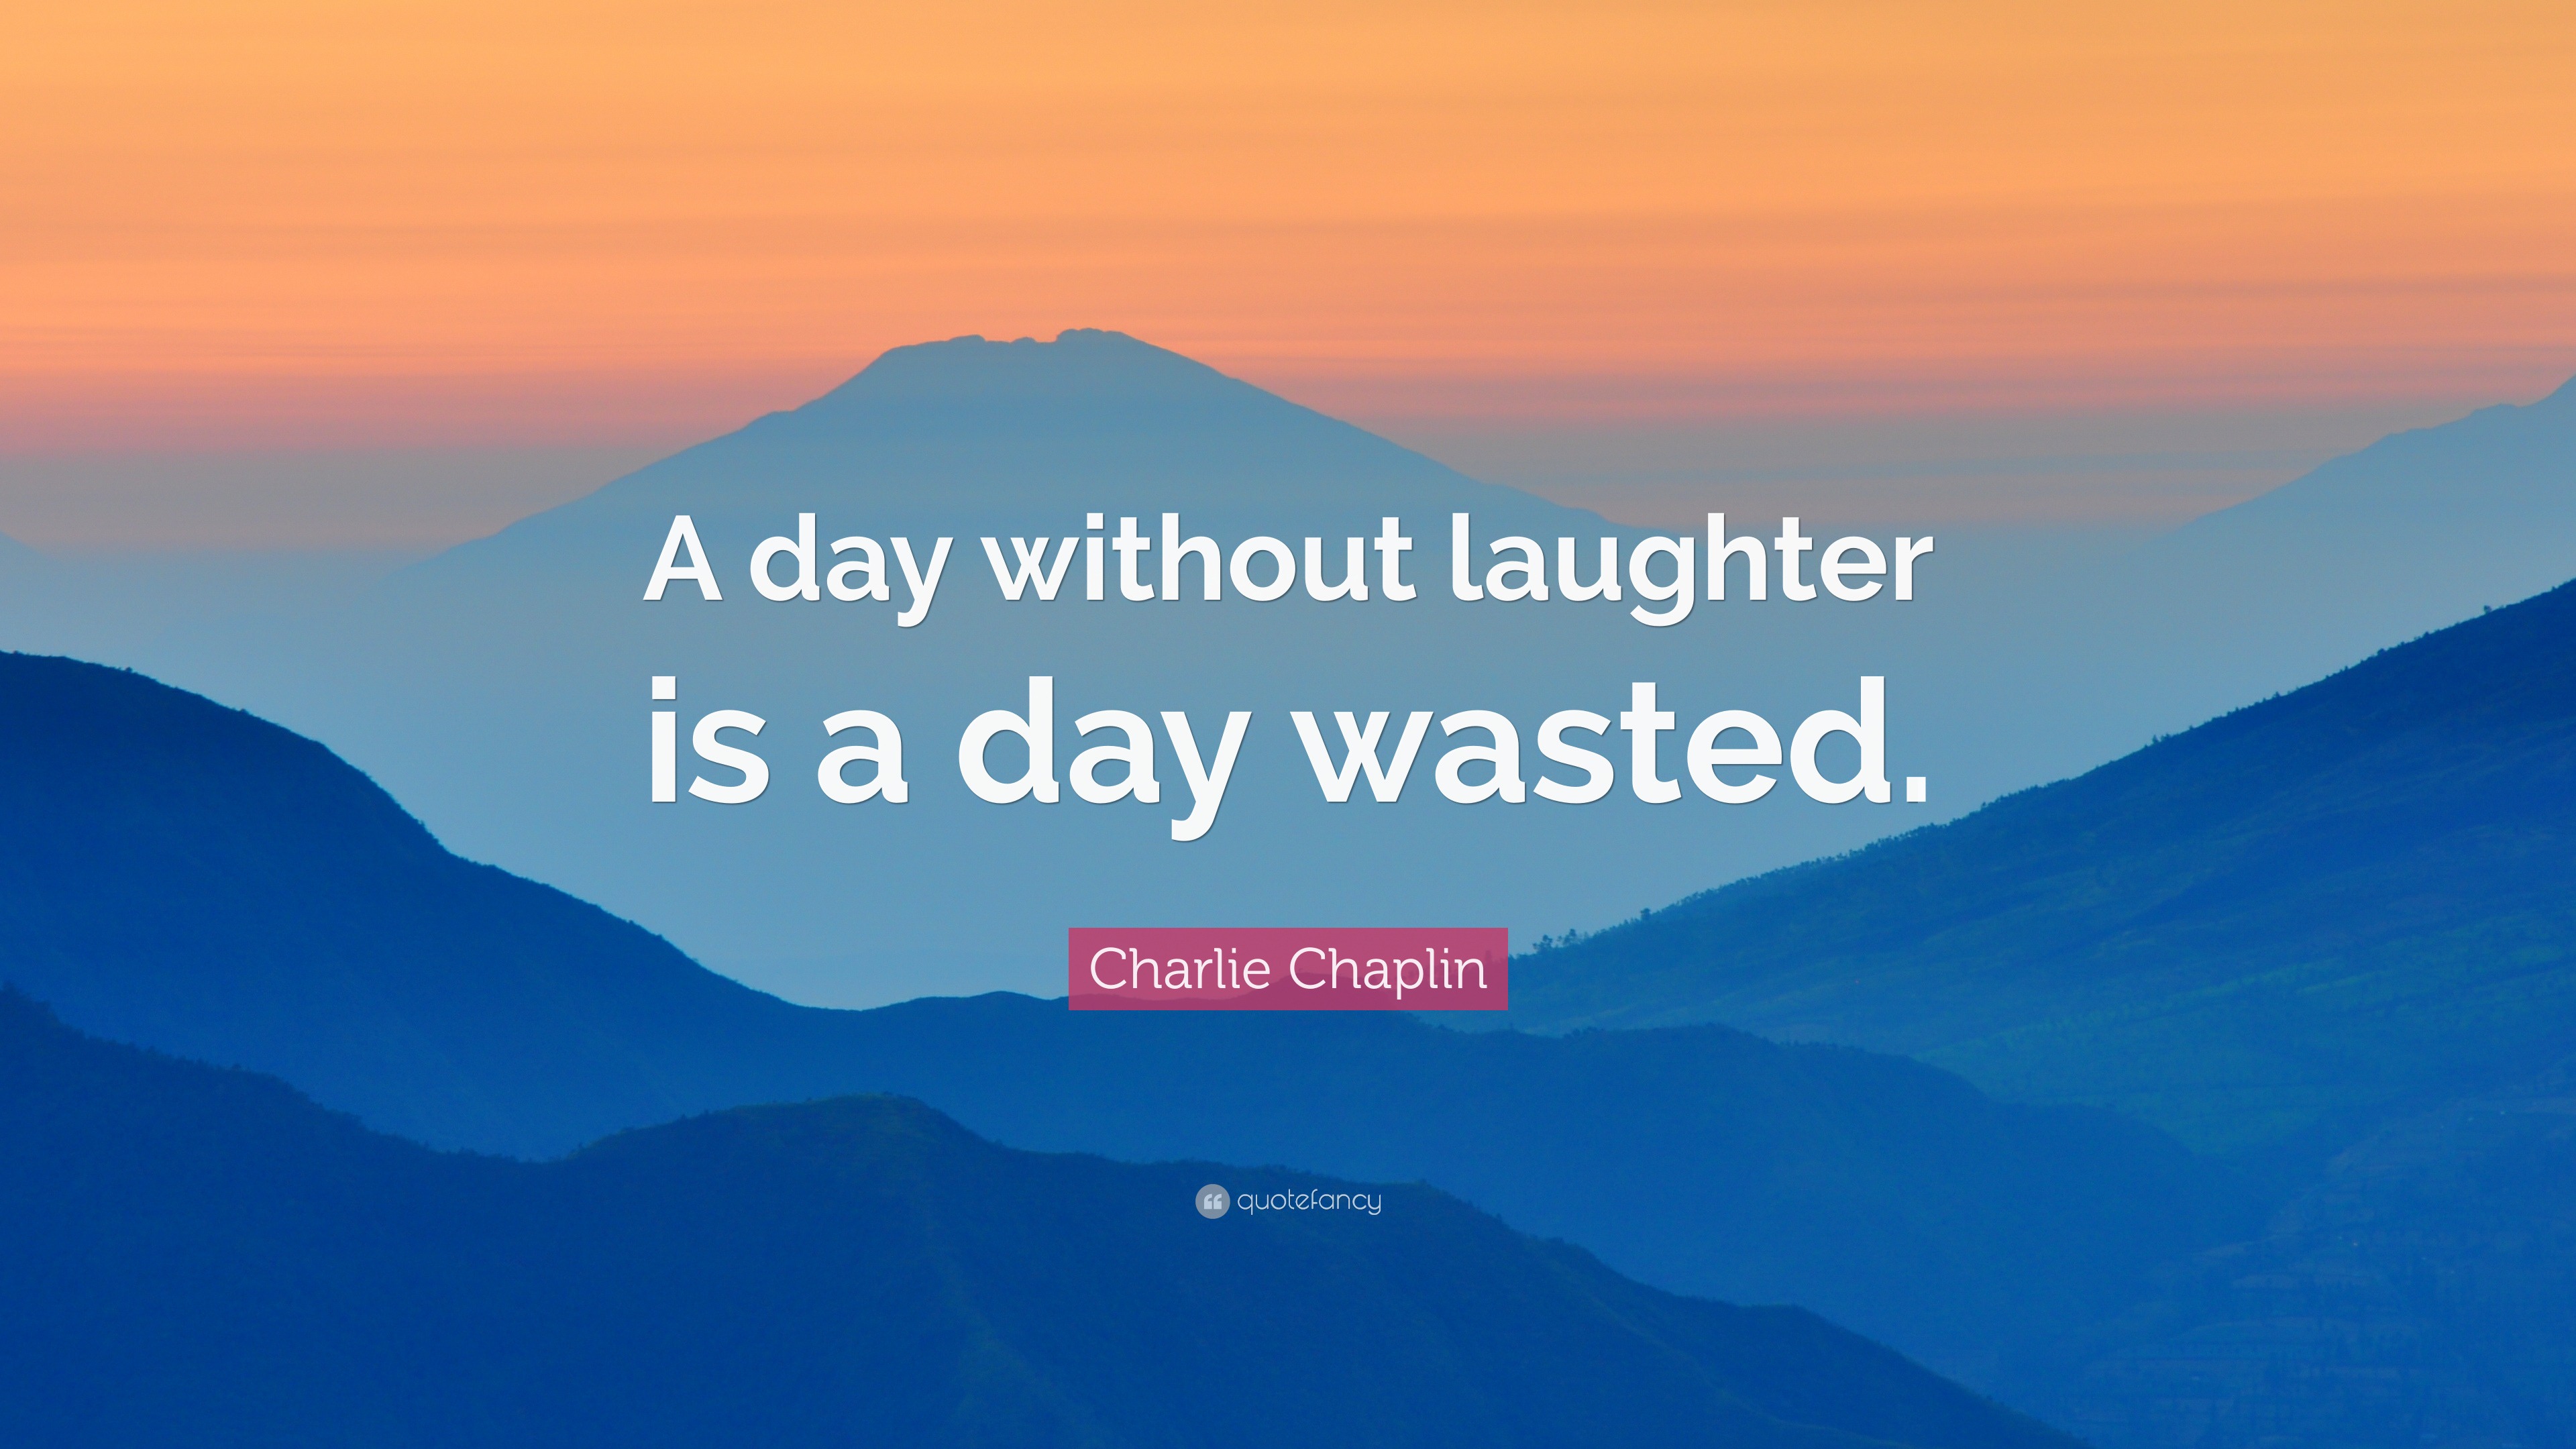 charlie-chaplin-quote-a-day-without-laughter-is-a-day-wasted